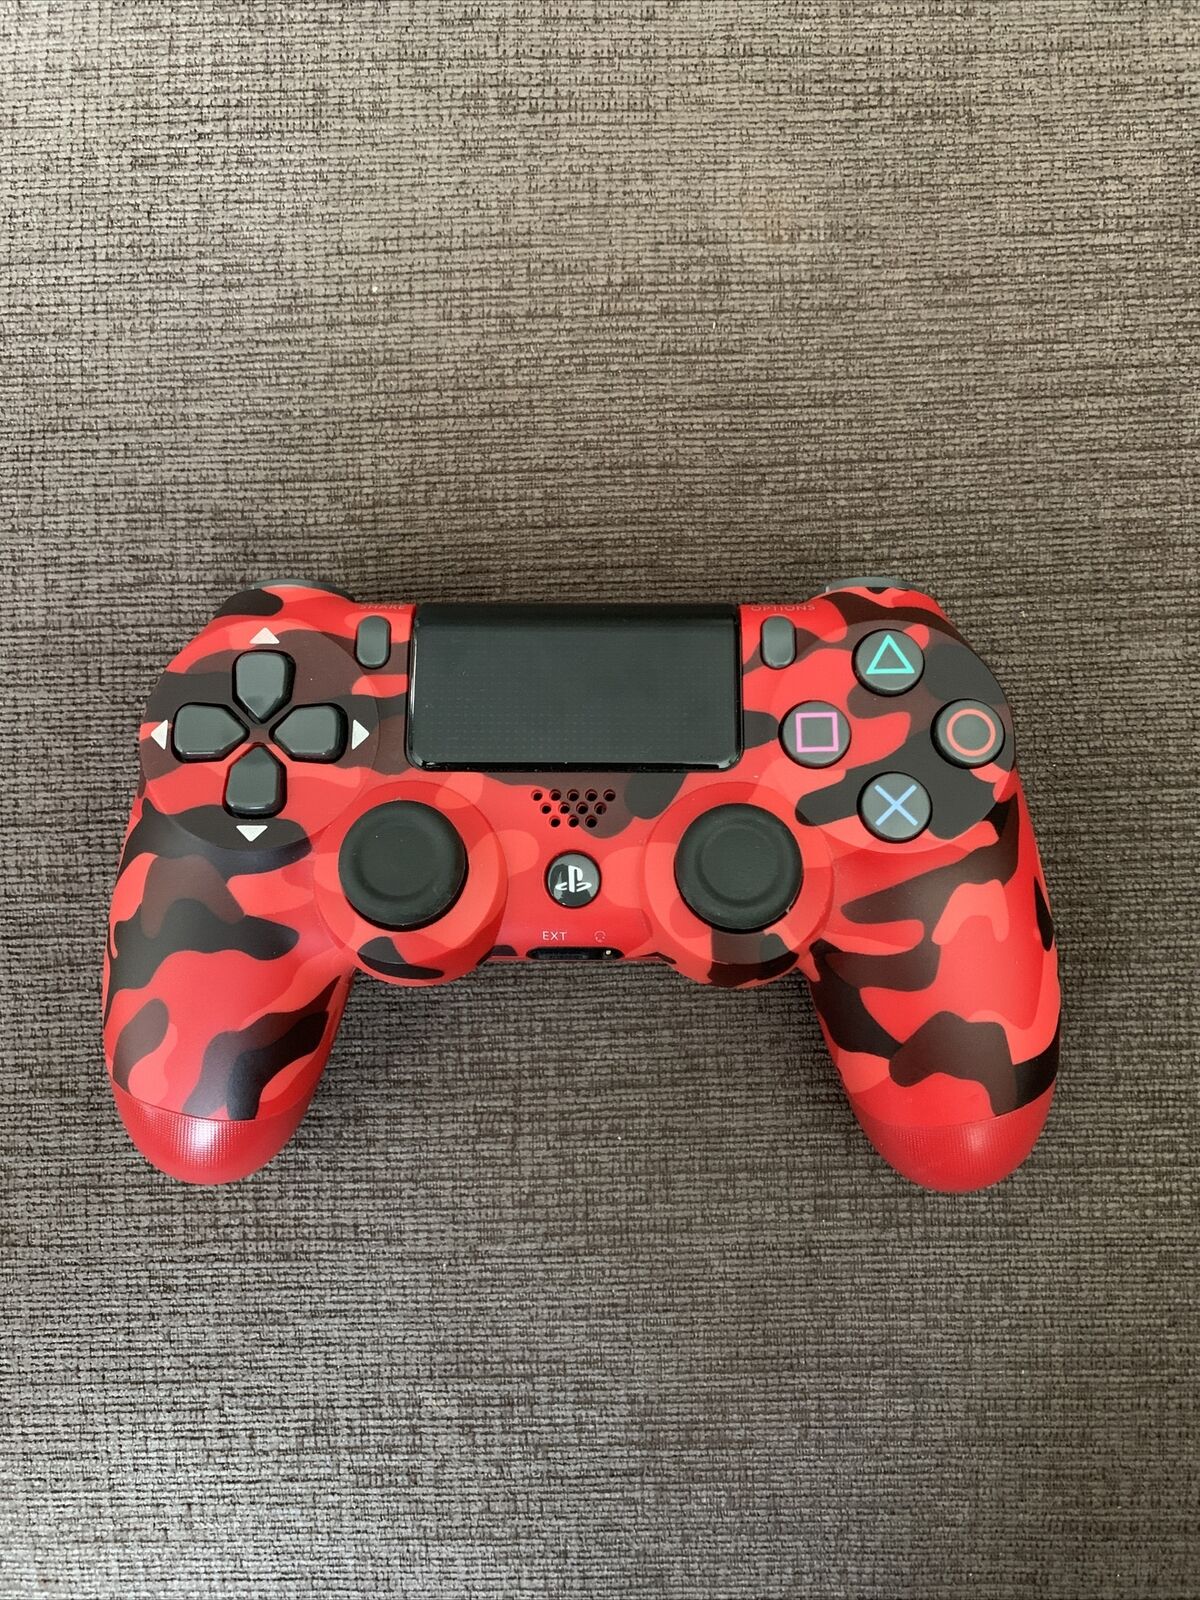 Sony Playstation 4 Ps4 Dualshock 4 Wireless Controller Red Camo Cuh Zct2u For Sale Simhq Com